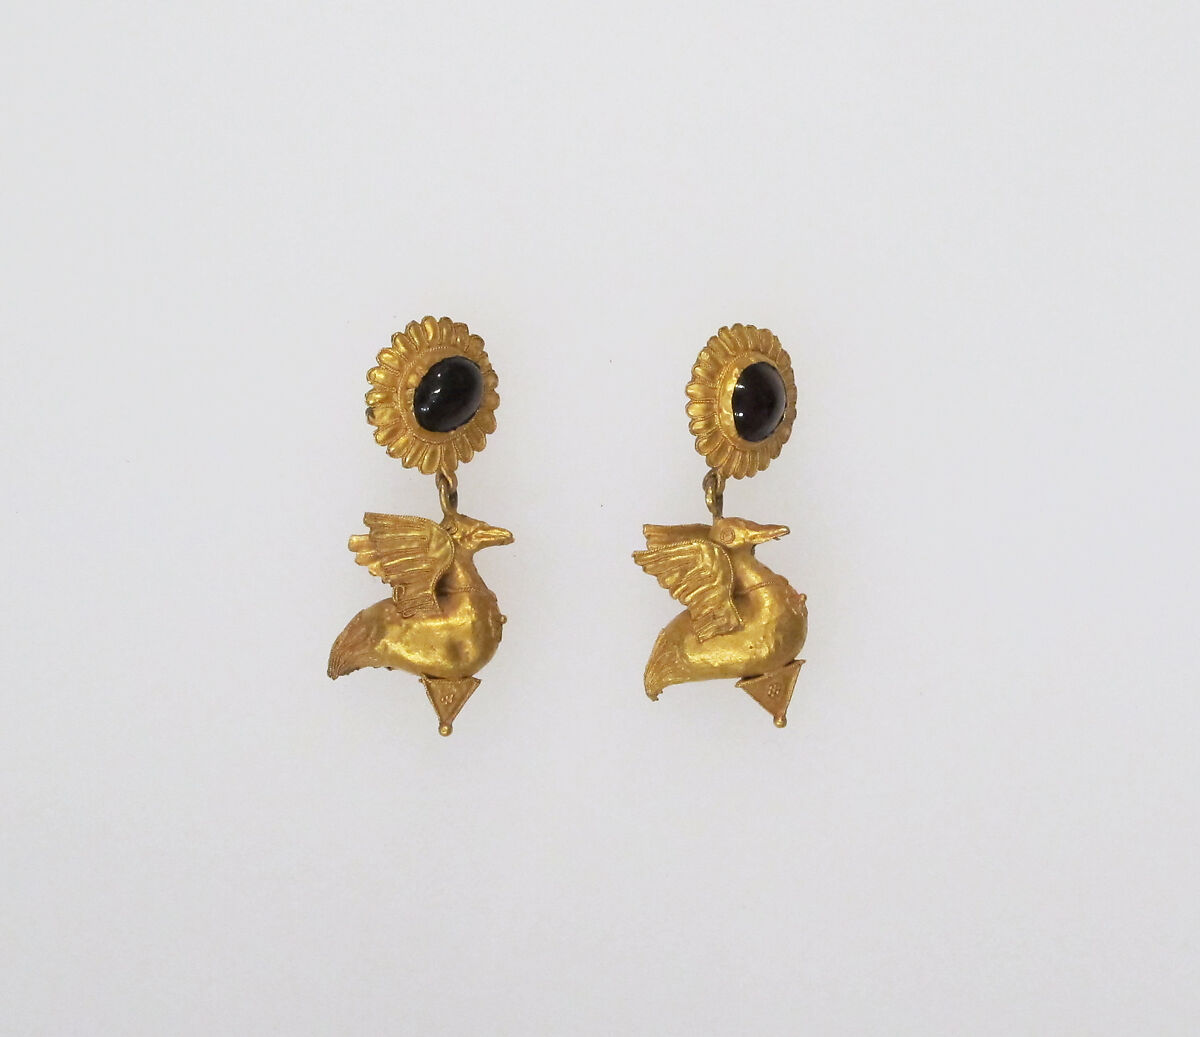 Earring with pendants of birds, Gold, carbuncle, Greek 